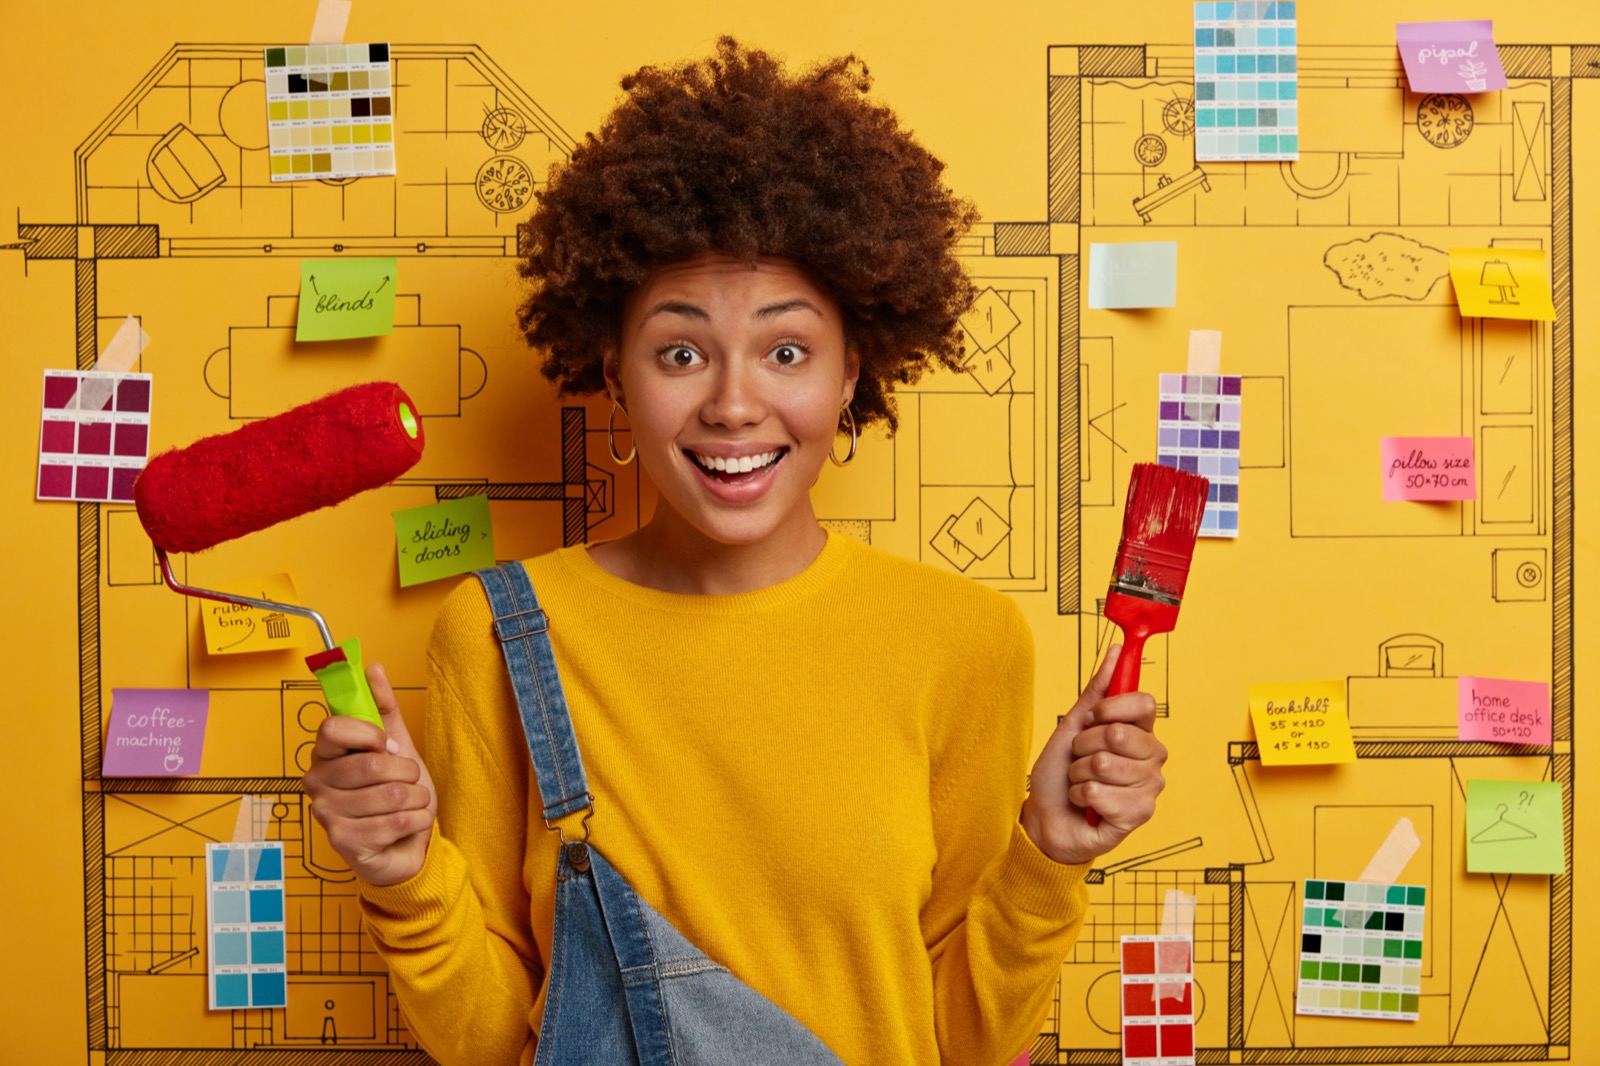 Creative Painter Holds Paint Roller And Brush, Does House Repairing, Dressed In Yellow Jumper And Overalls, Stands Against House Sketch With Color Samples, Sticky Notes. Renovation